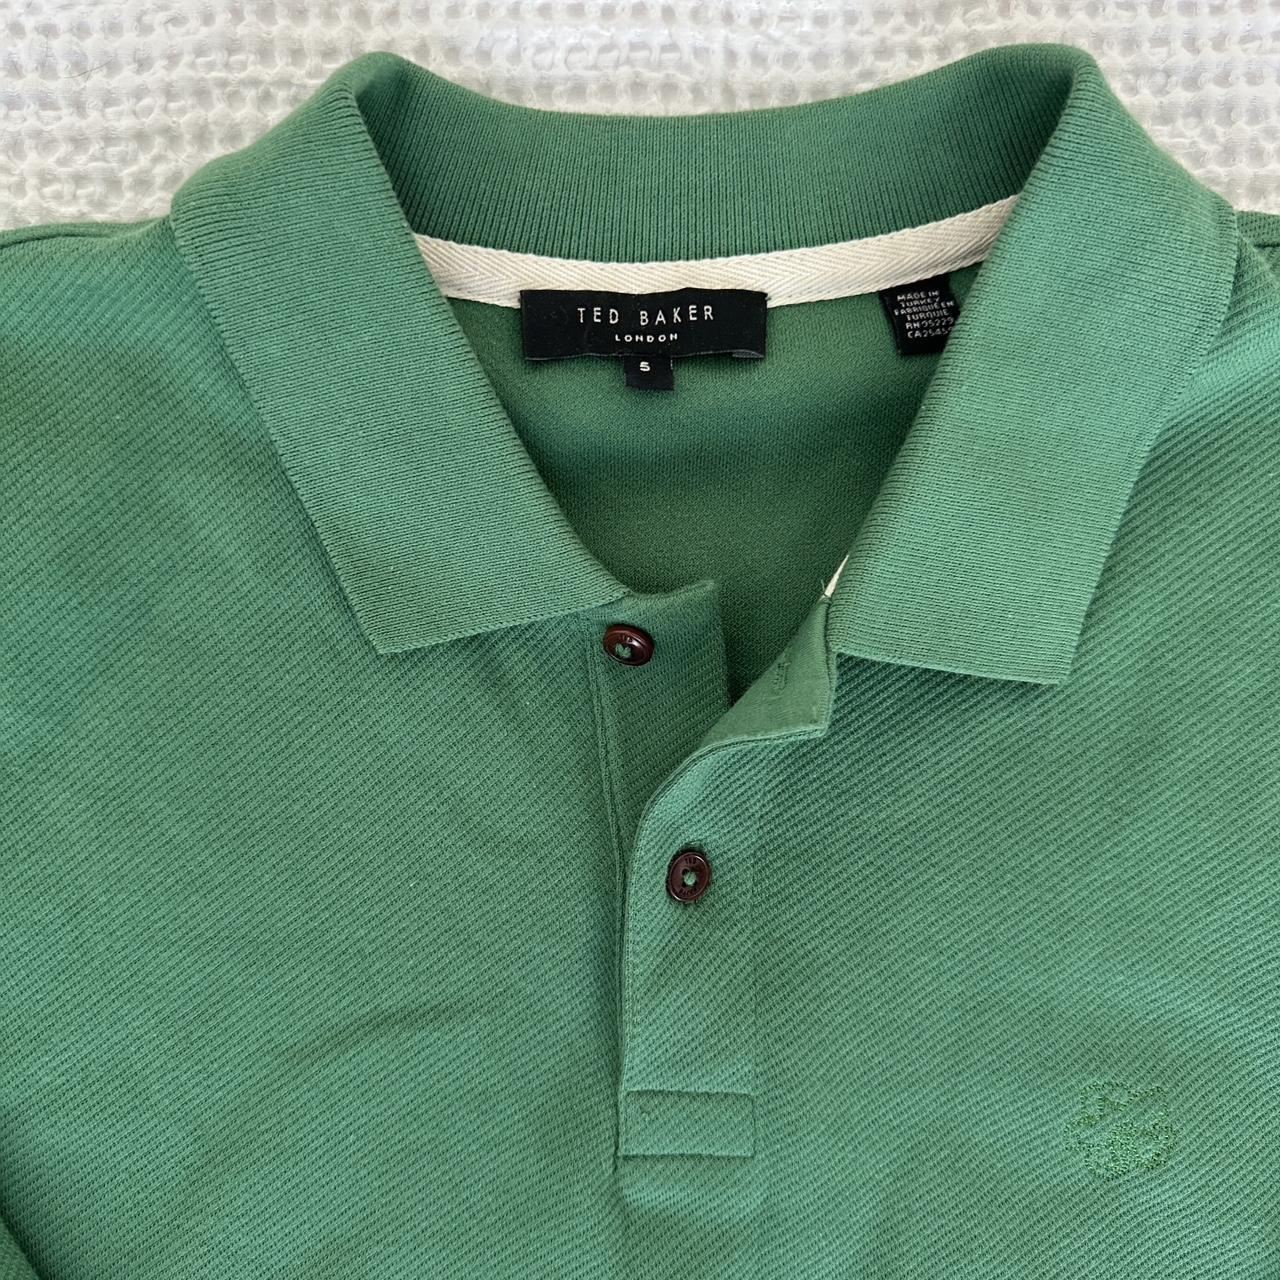 Ted Baker Men's Green Polo-shirts (2)